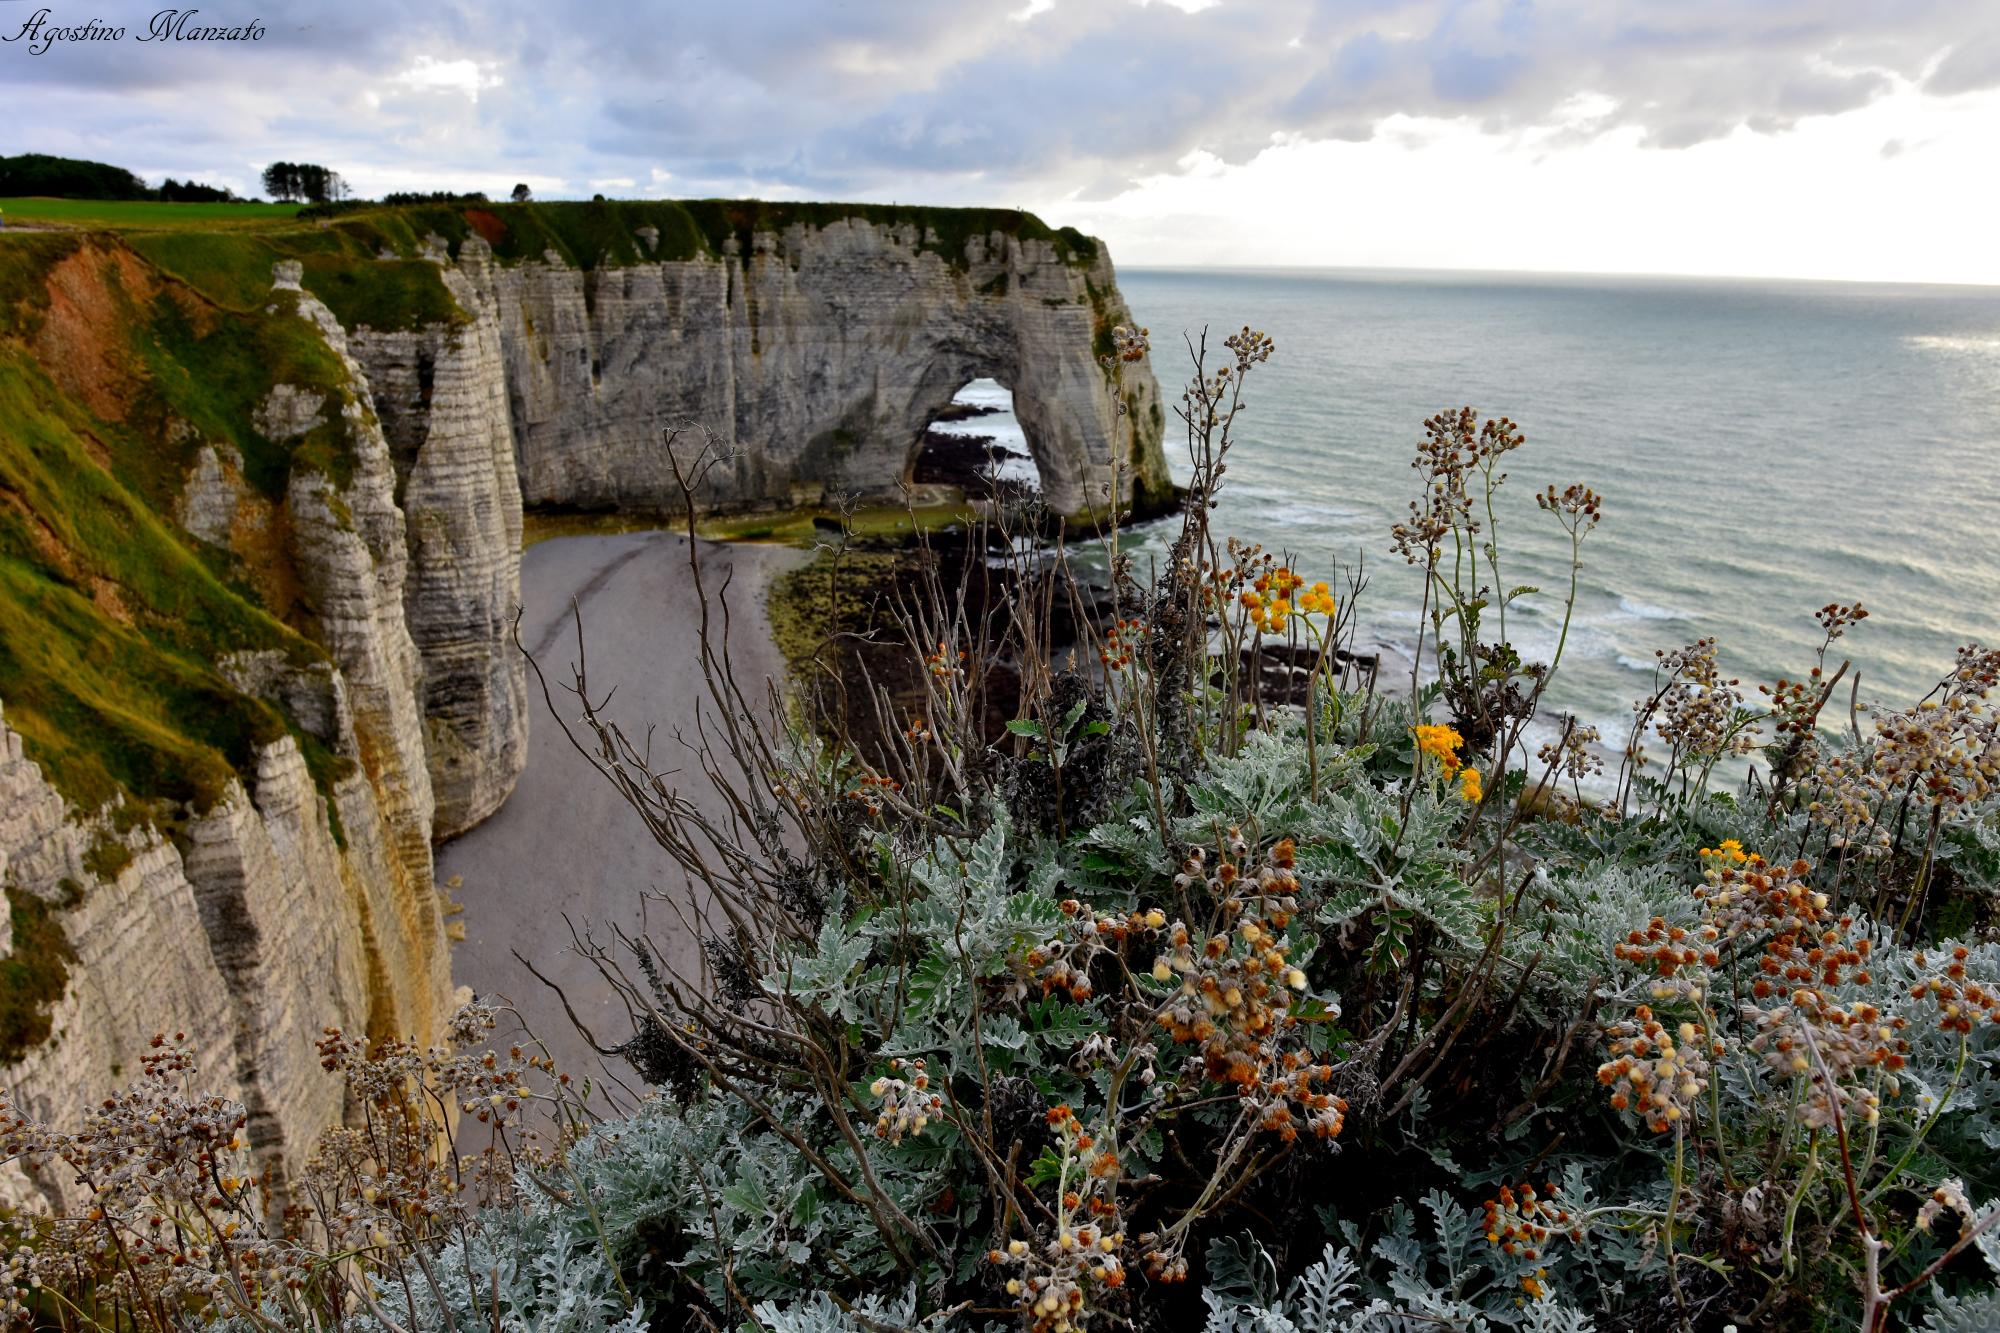 The flowers of the cliffs...